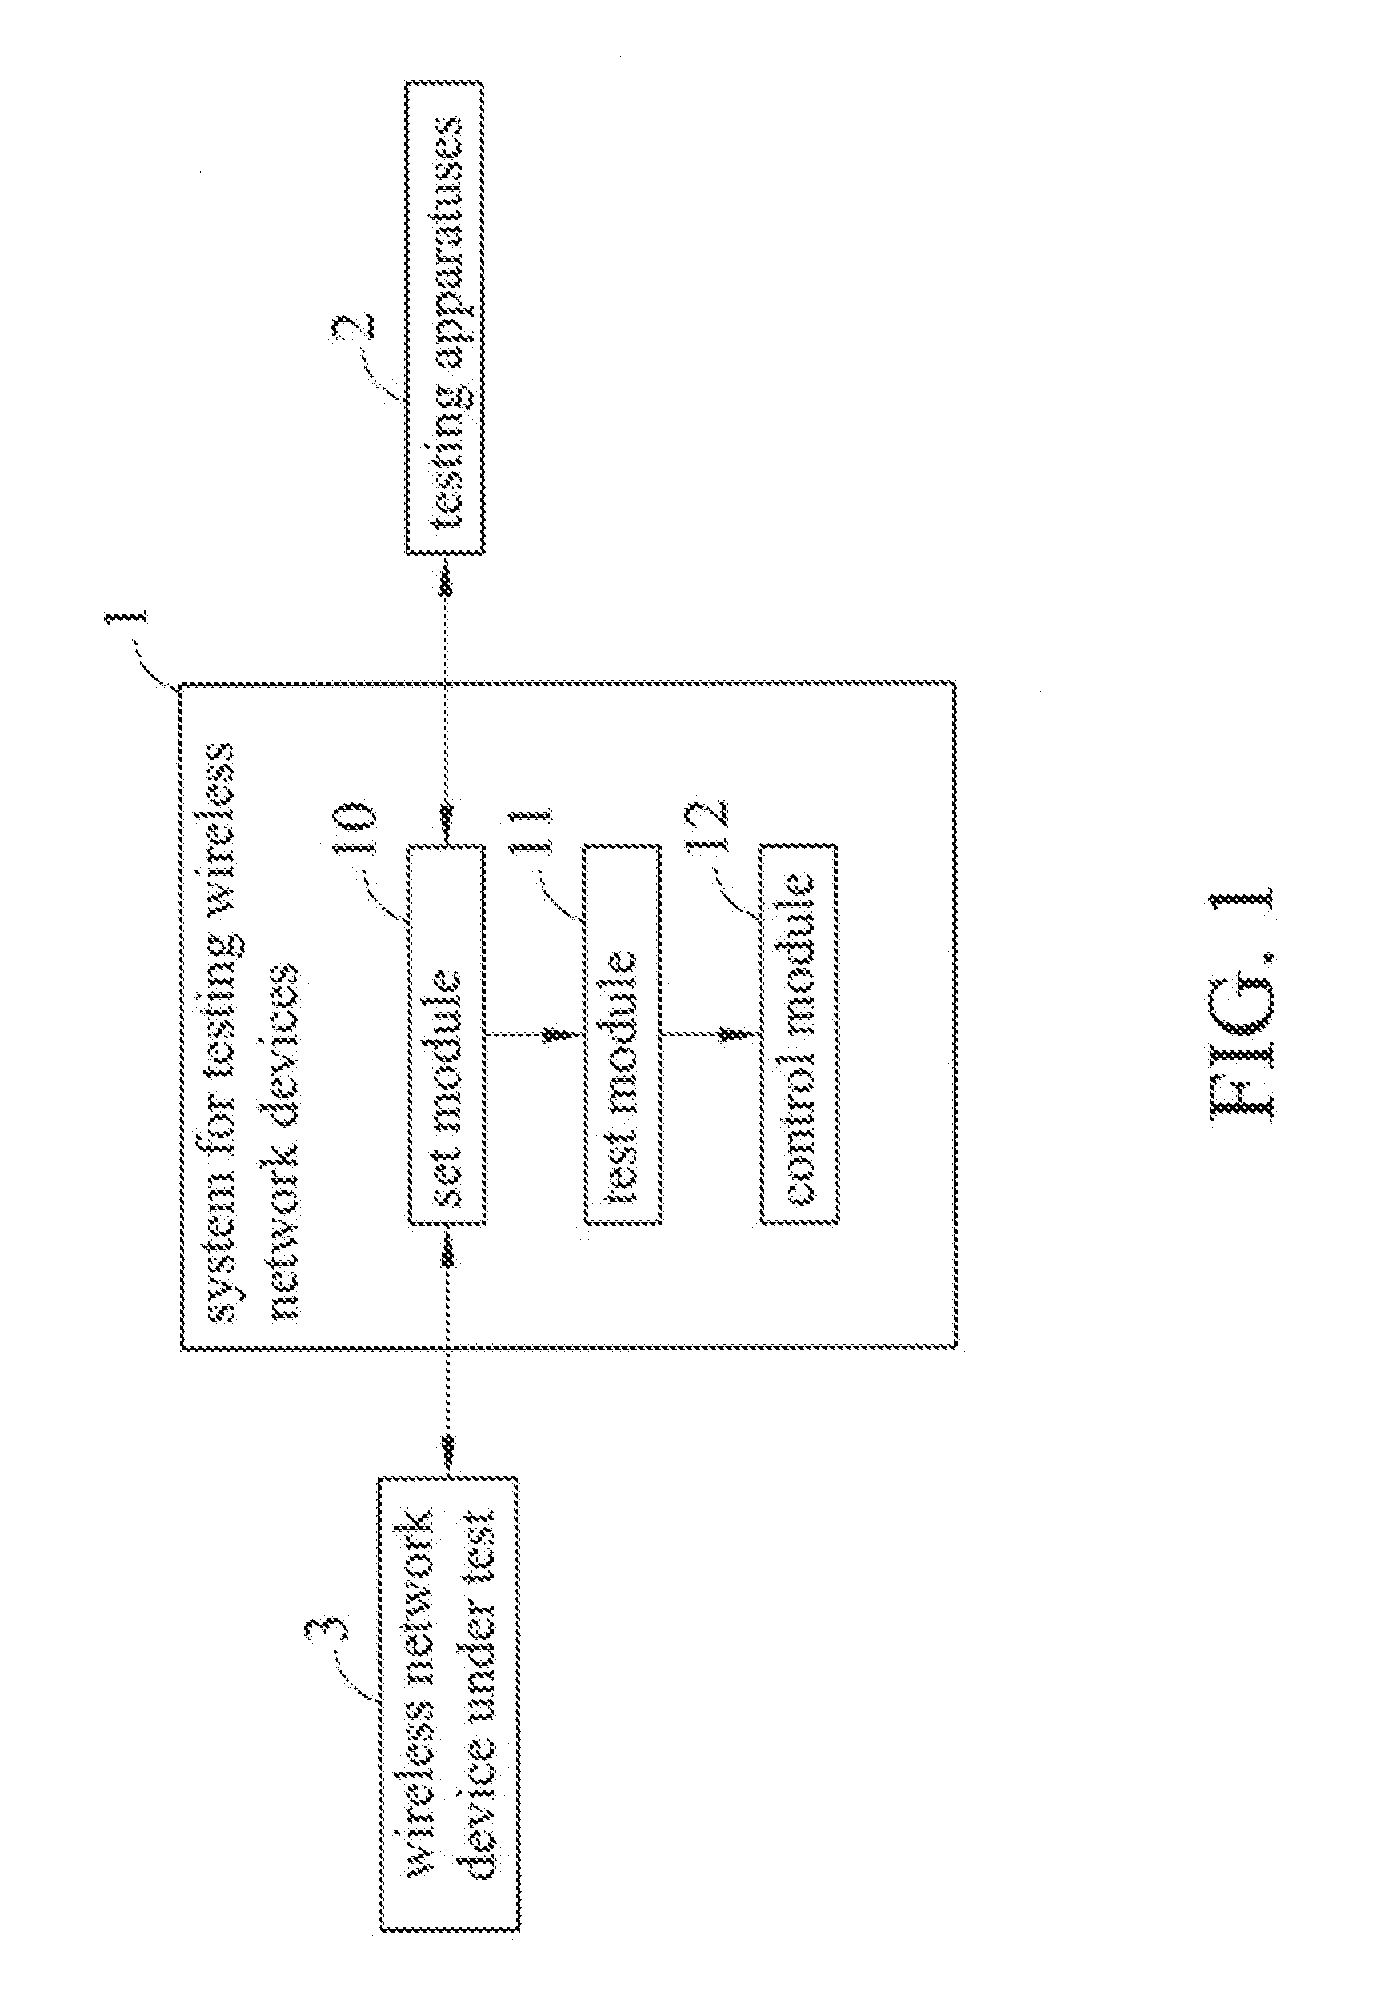 System and method for testing wireless network device